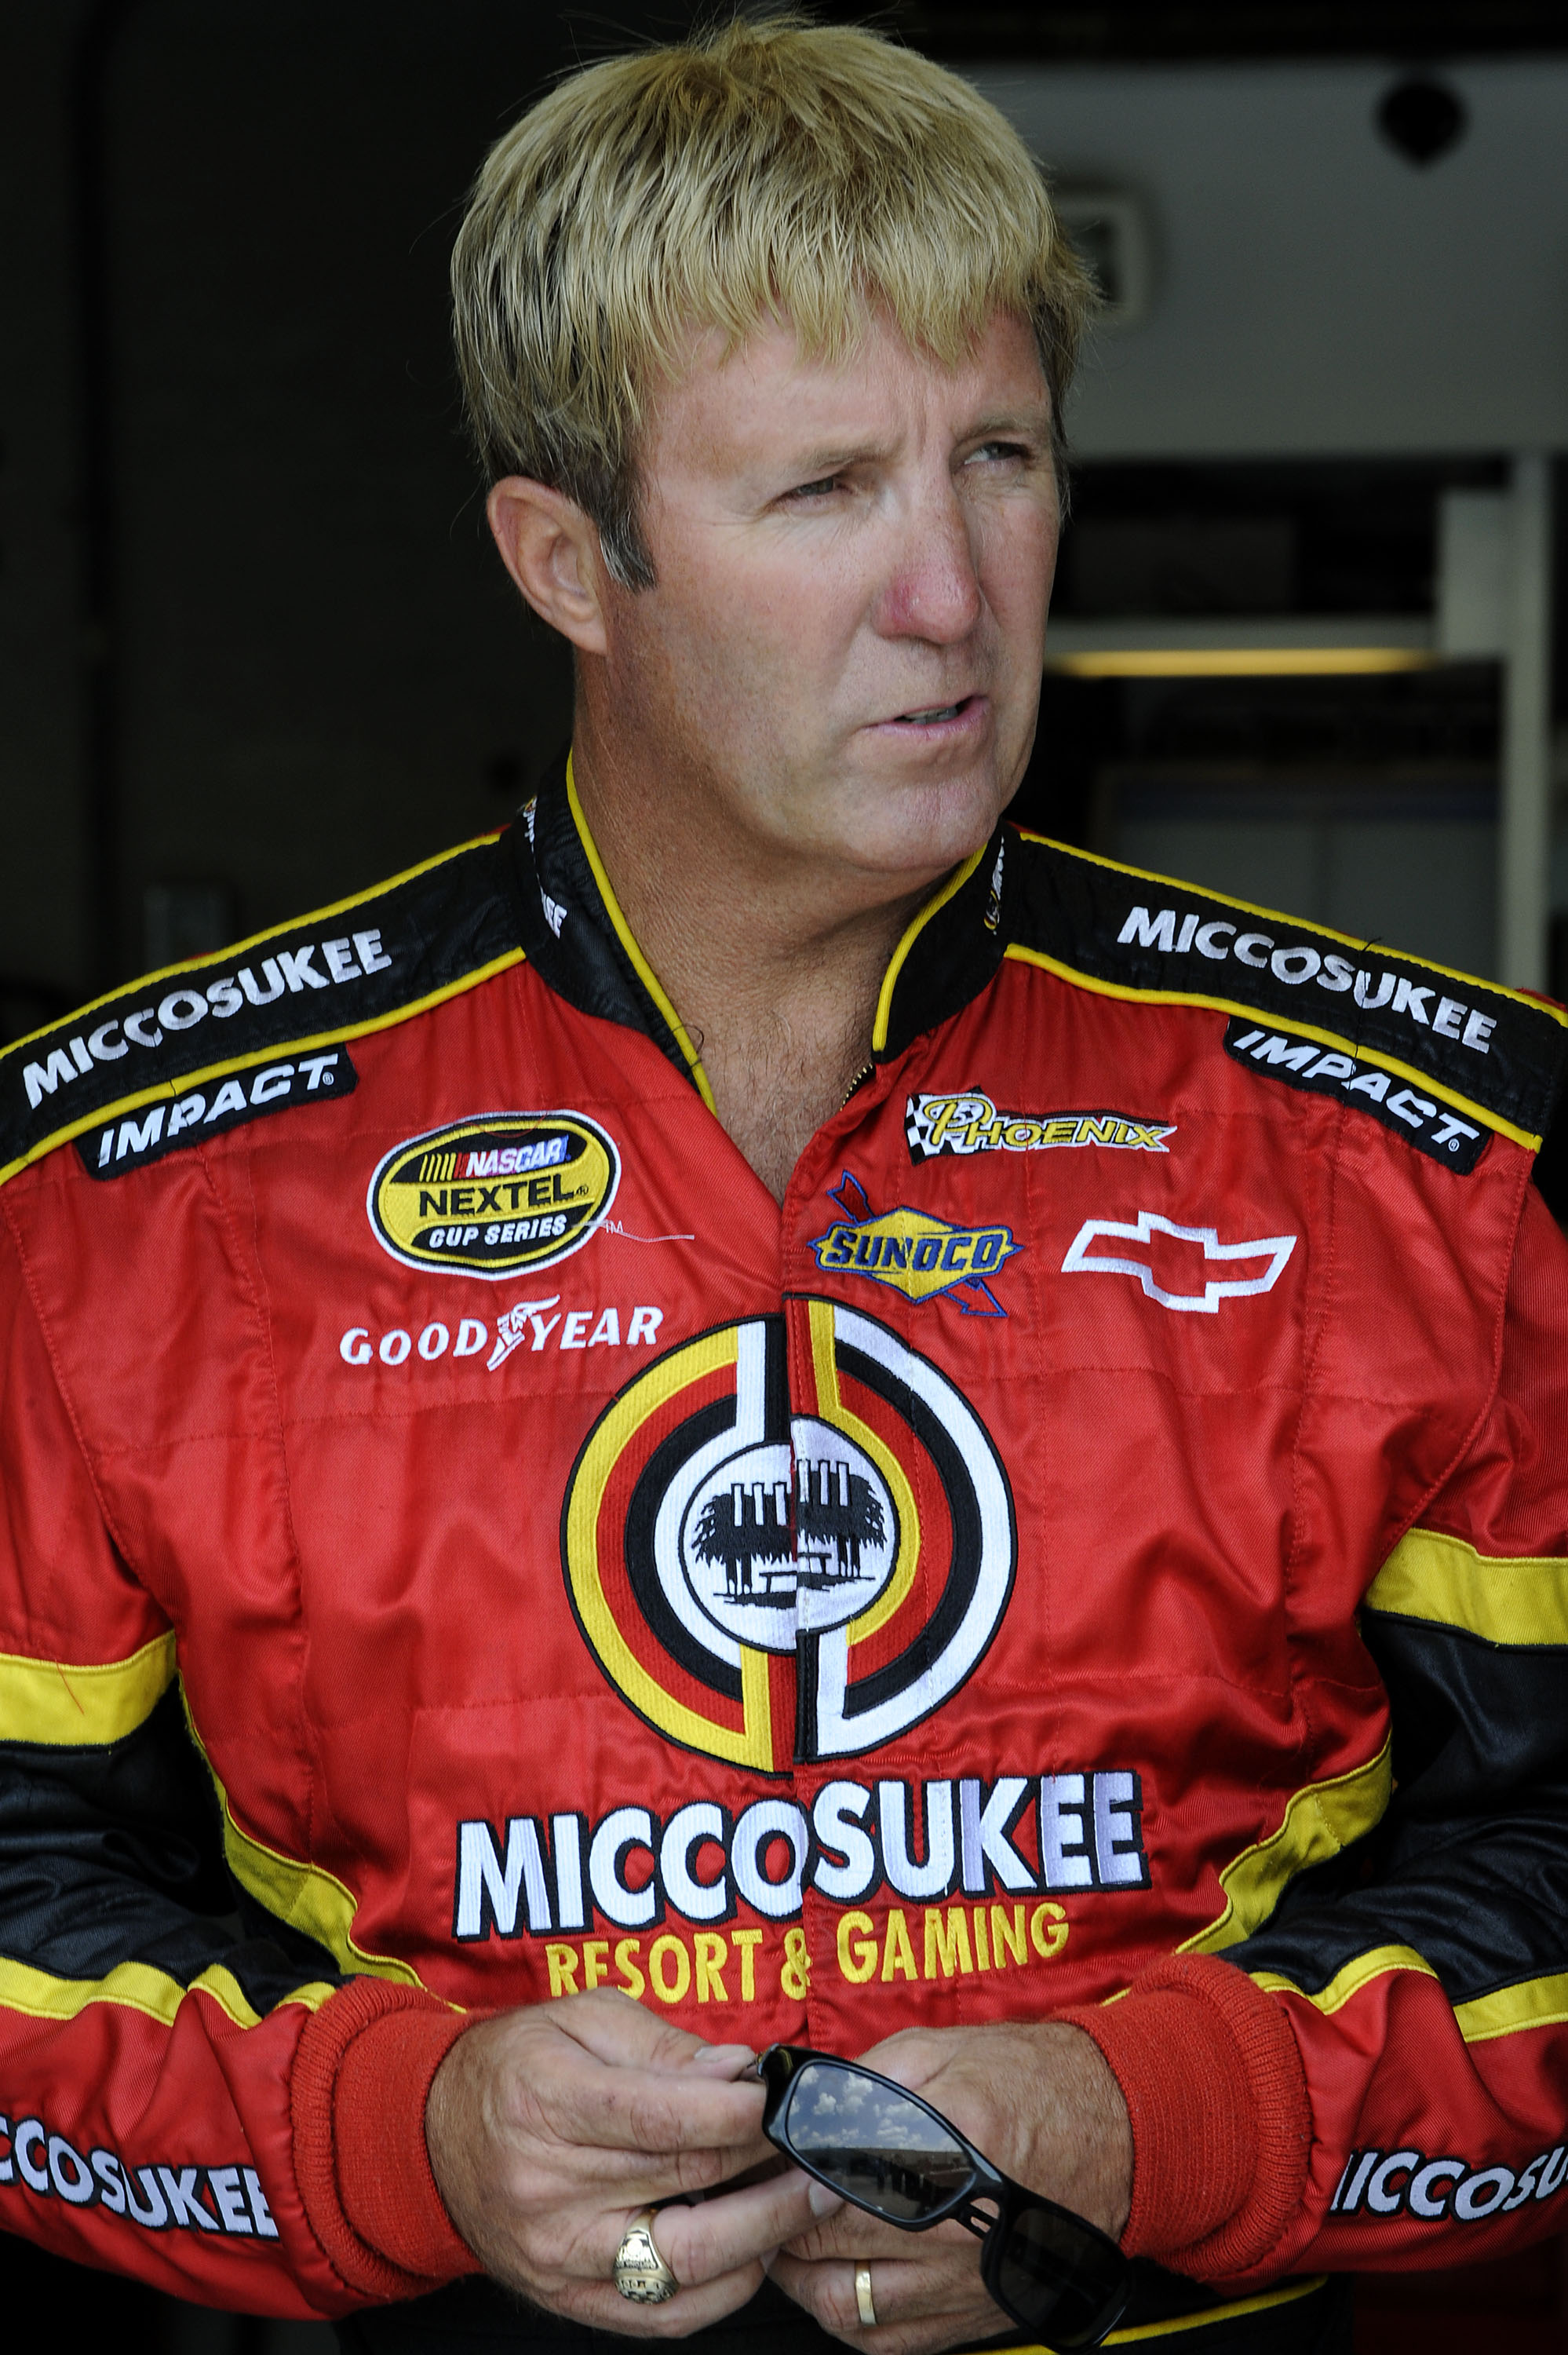 INDIANAPOLIS - JULY 24:  Sterling Marlin, driver of the #09 Miccosukee Indian Gaming & Resort Dodge, stands in the garge during practice for the NASCAR Sprint Cup Series Allstate 400 at the Brickyard at Indianapolis Motor Speedway on July 24, 2009 in Indi